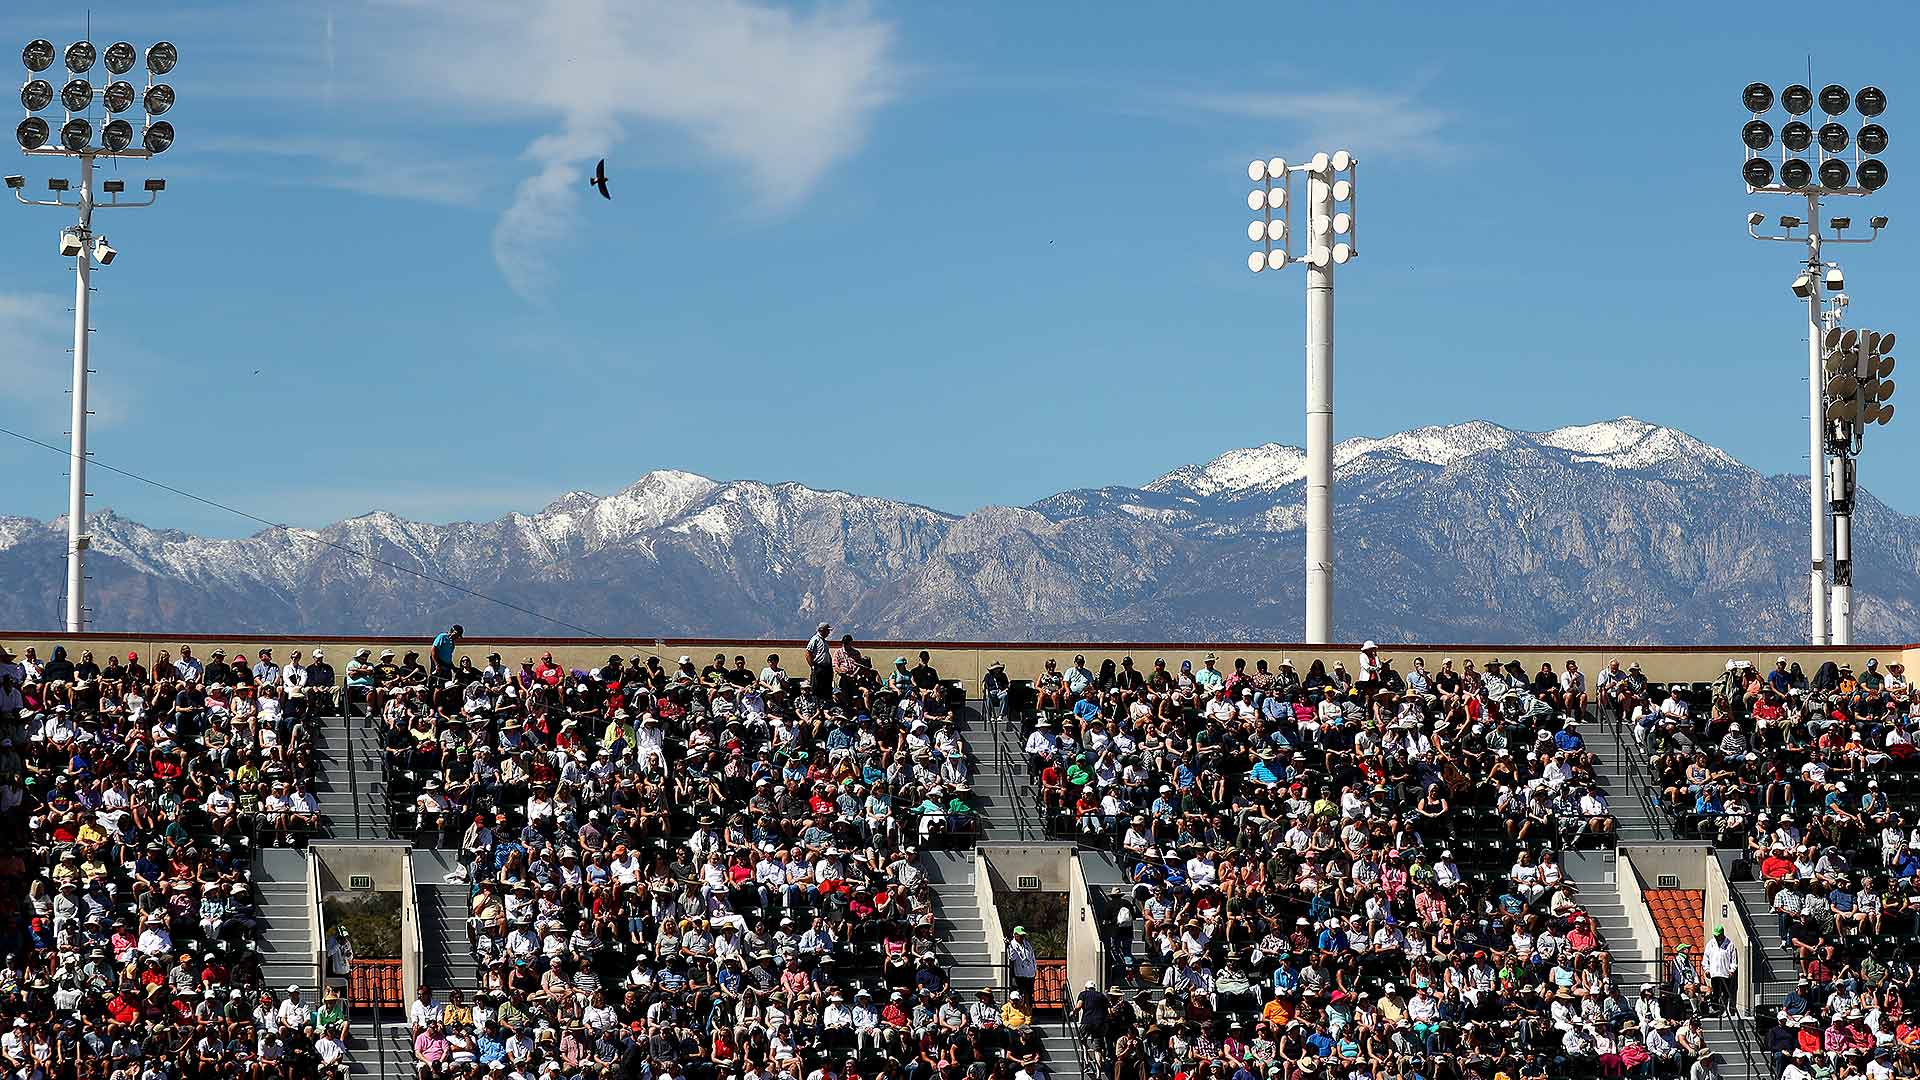 The 2020 BNP Paribas Open will not proceed as scheduled.